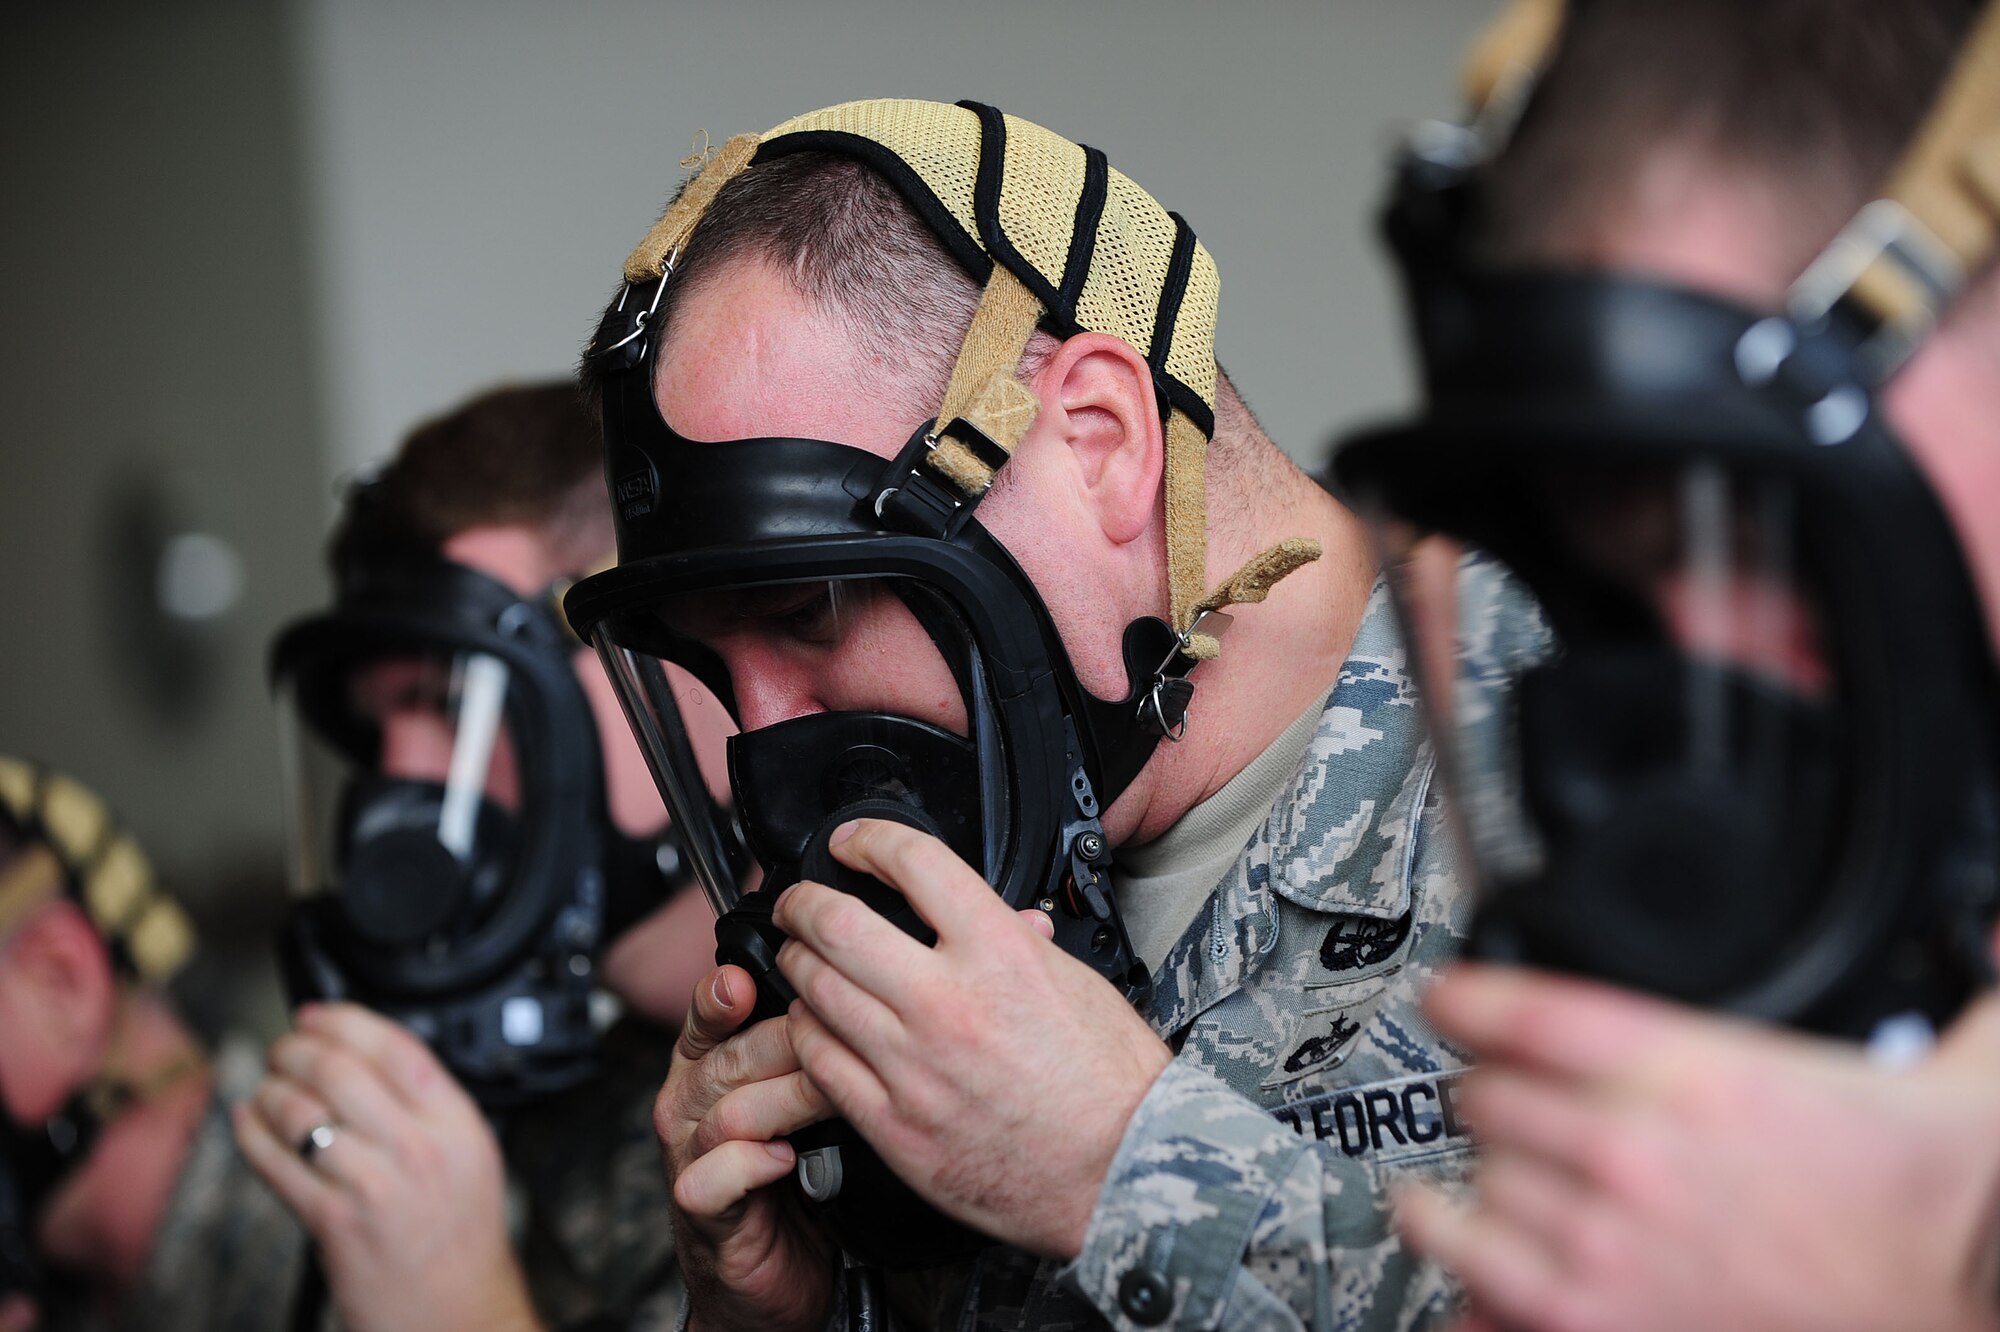 Staff Sgt. James Hardcastle 39th Civil Engineer Squadron explosive ordnance disposal technician, dons a self contained breathing apparatus mask during a readiness inspection May 2, 2014, Incirlik Air Base, Turkey.  EOD along with many other units at Incirlik AB, were inspected by the United States Air Forces in Europe inspector general team. (U.S. Air Force photo by Senior Airman Nicole Sikorski/Released)
